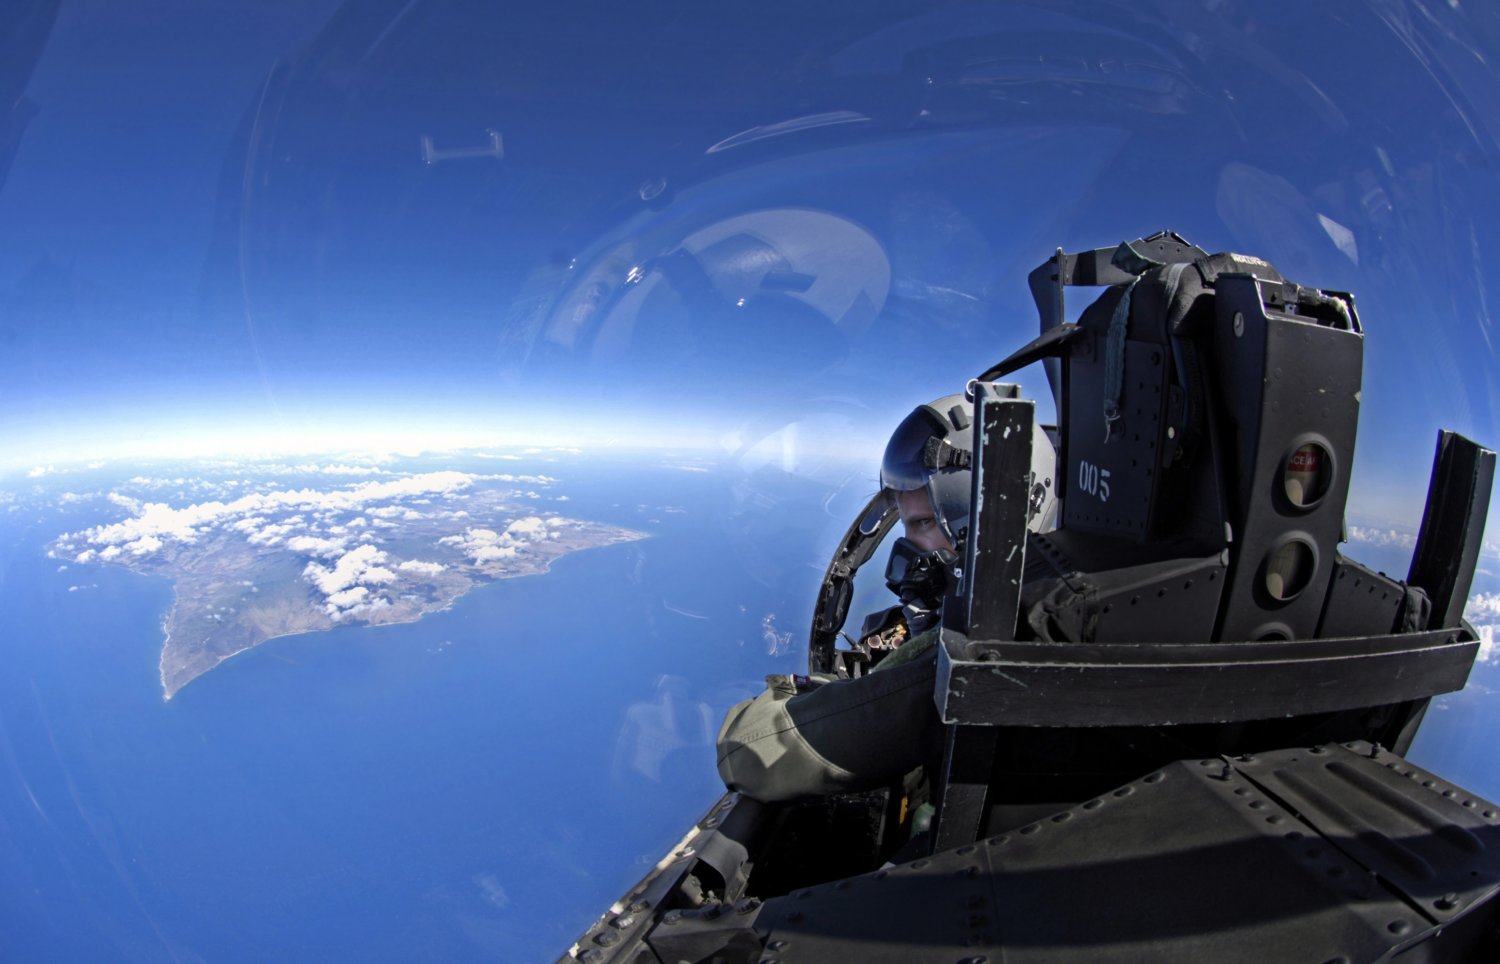 U.S. Air Force captain looks out over the sky